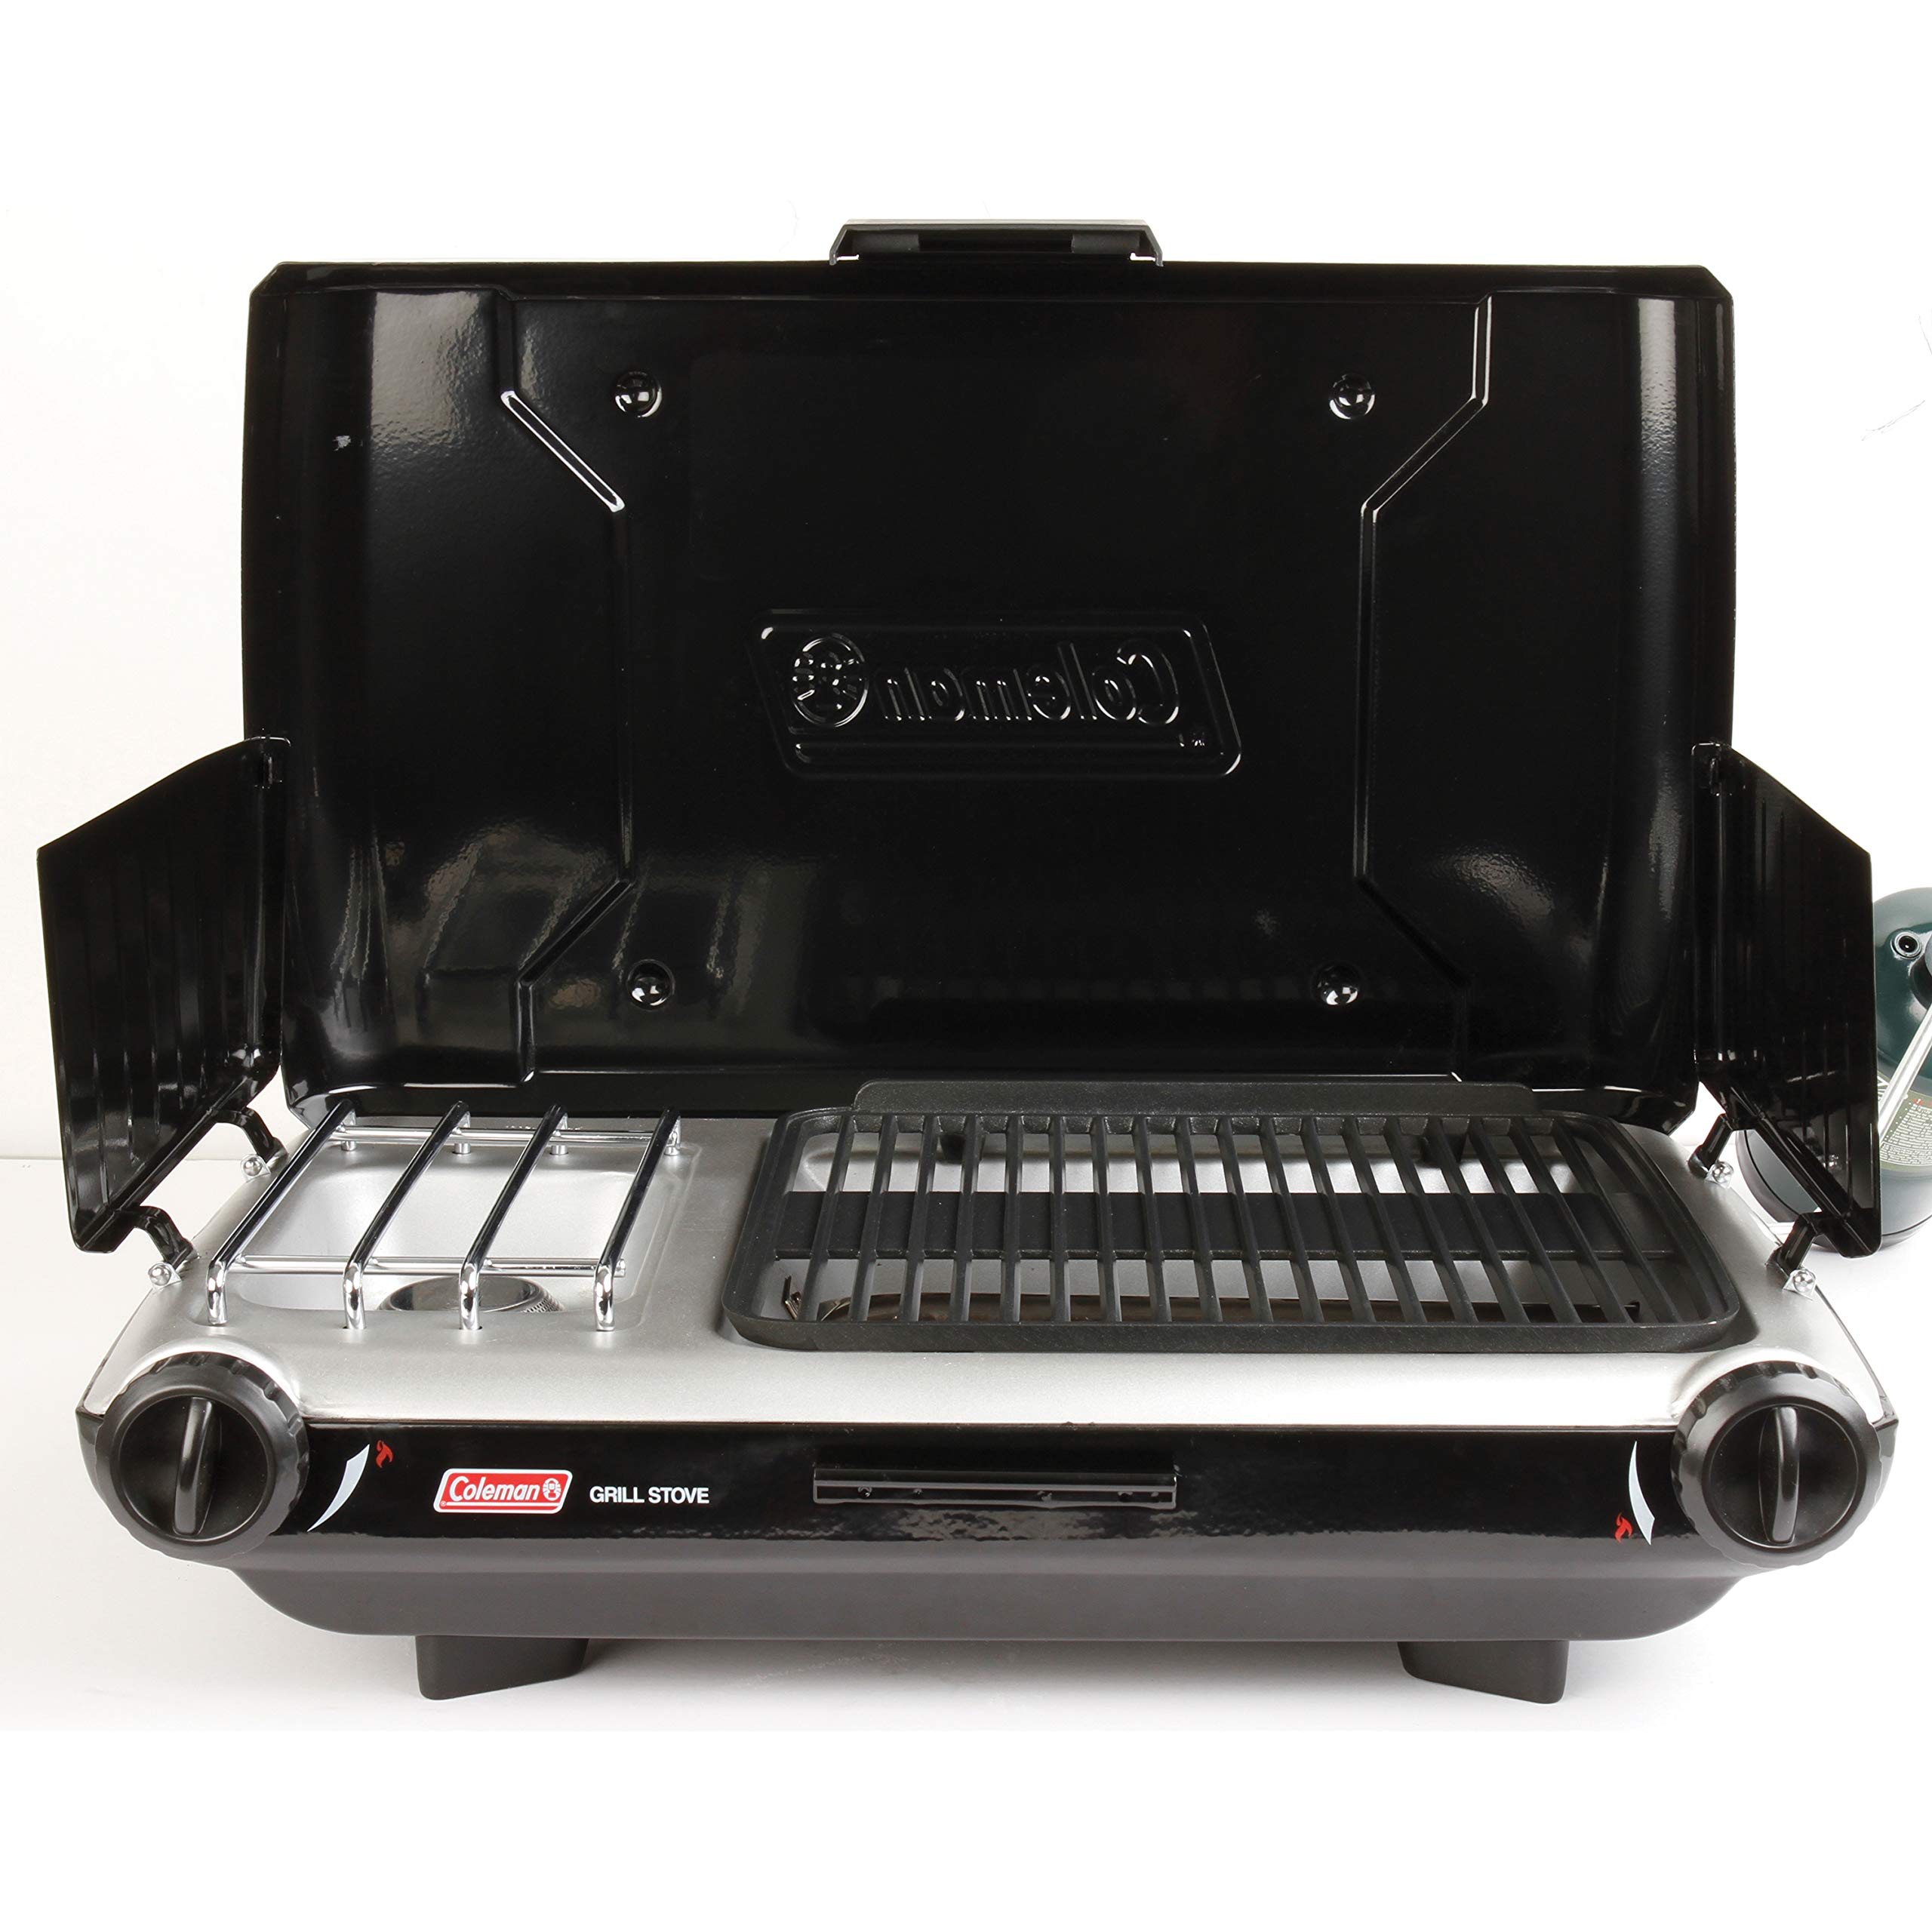 Coleman Tabletop 2-in-1 Camping Grill/Stove, 2-Burner Propane Grill and Stove for Outdoor Cooking with Adjustable Burners and Pressure Regulator, 20,000 BTUs of Power